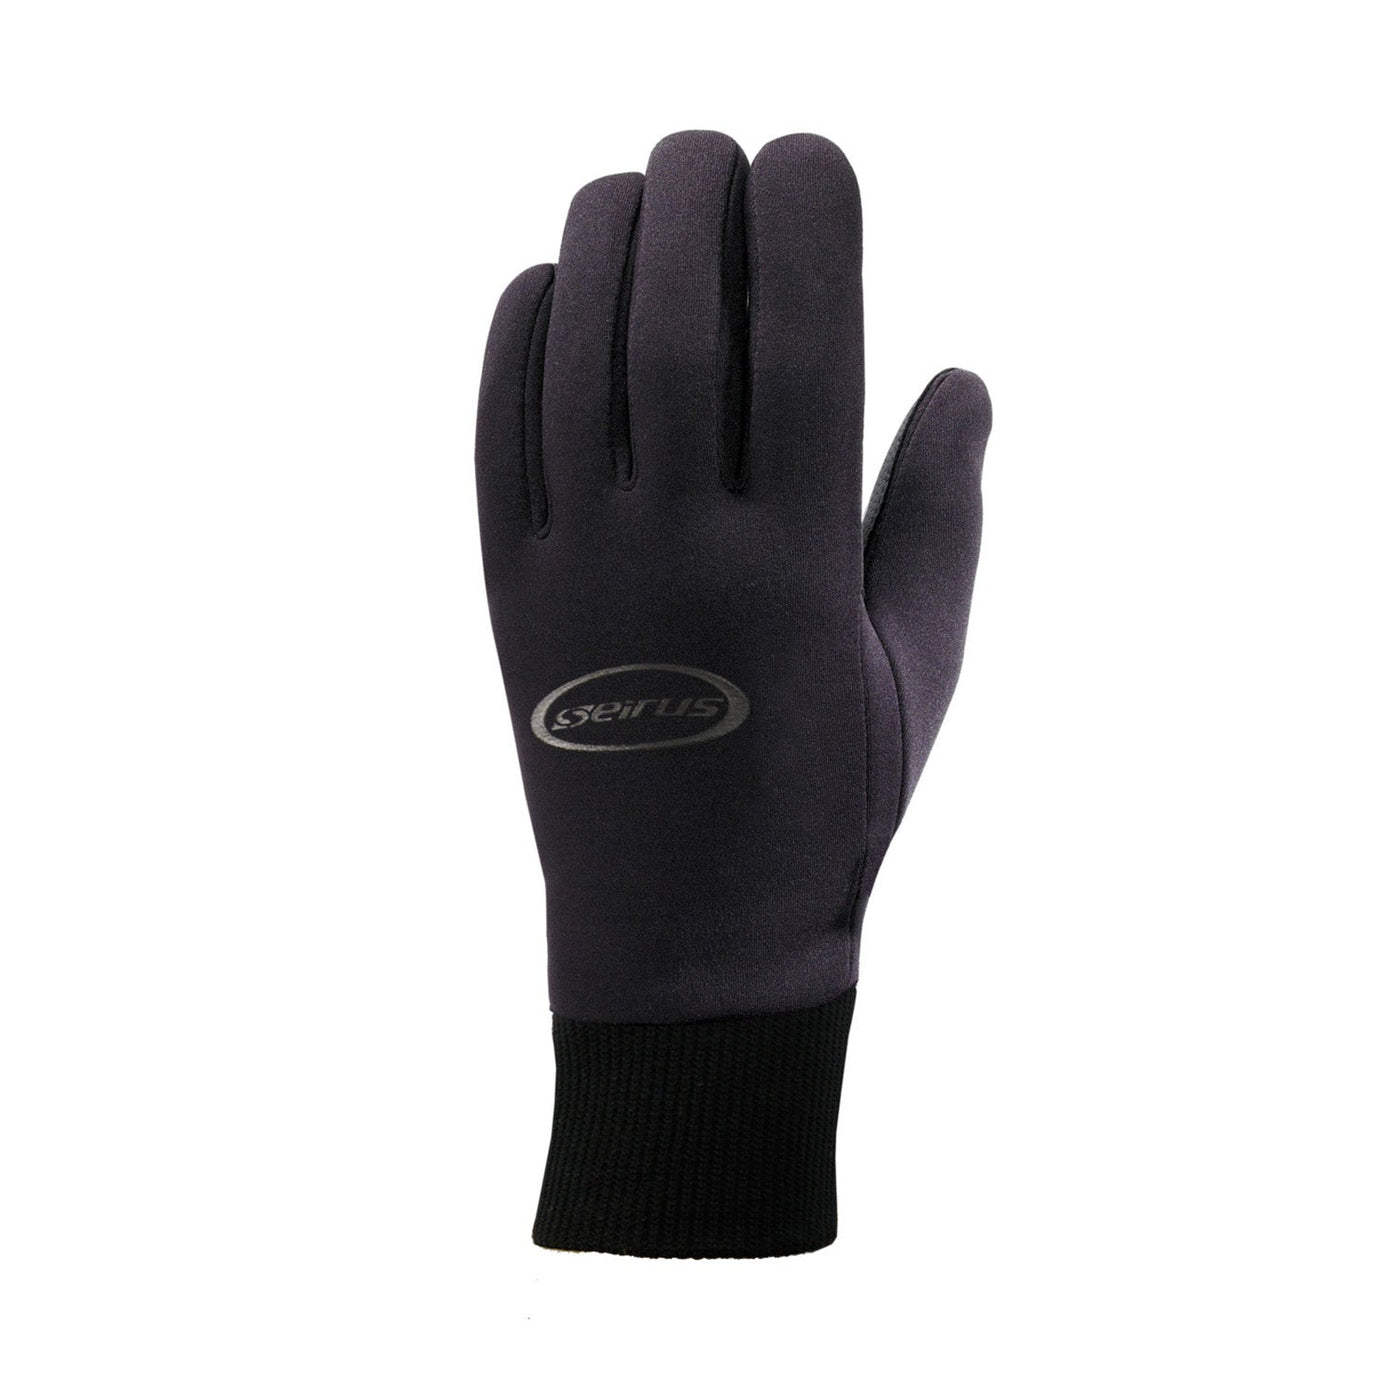 Seirus Seirus All Weather Glove Mens Black MD MD Apparel